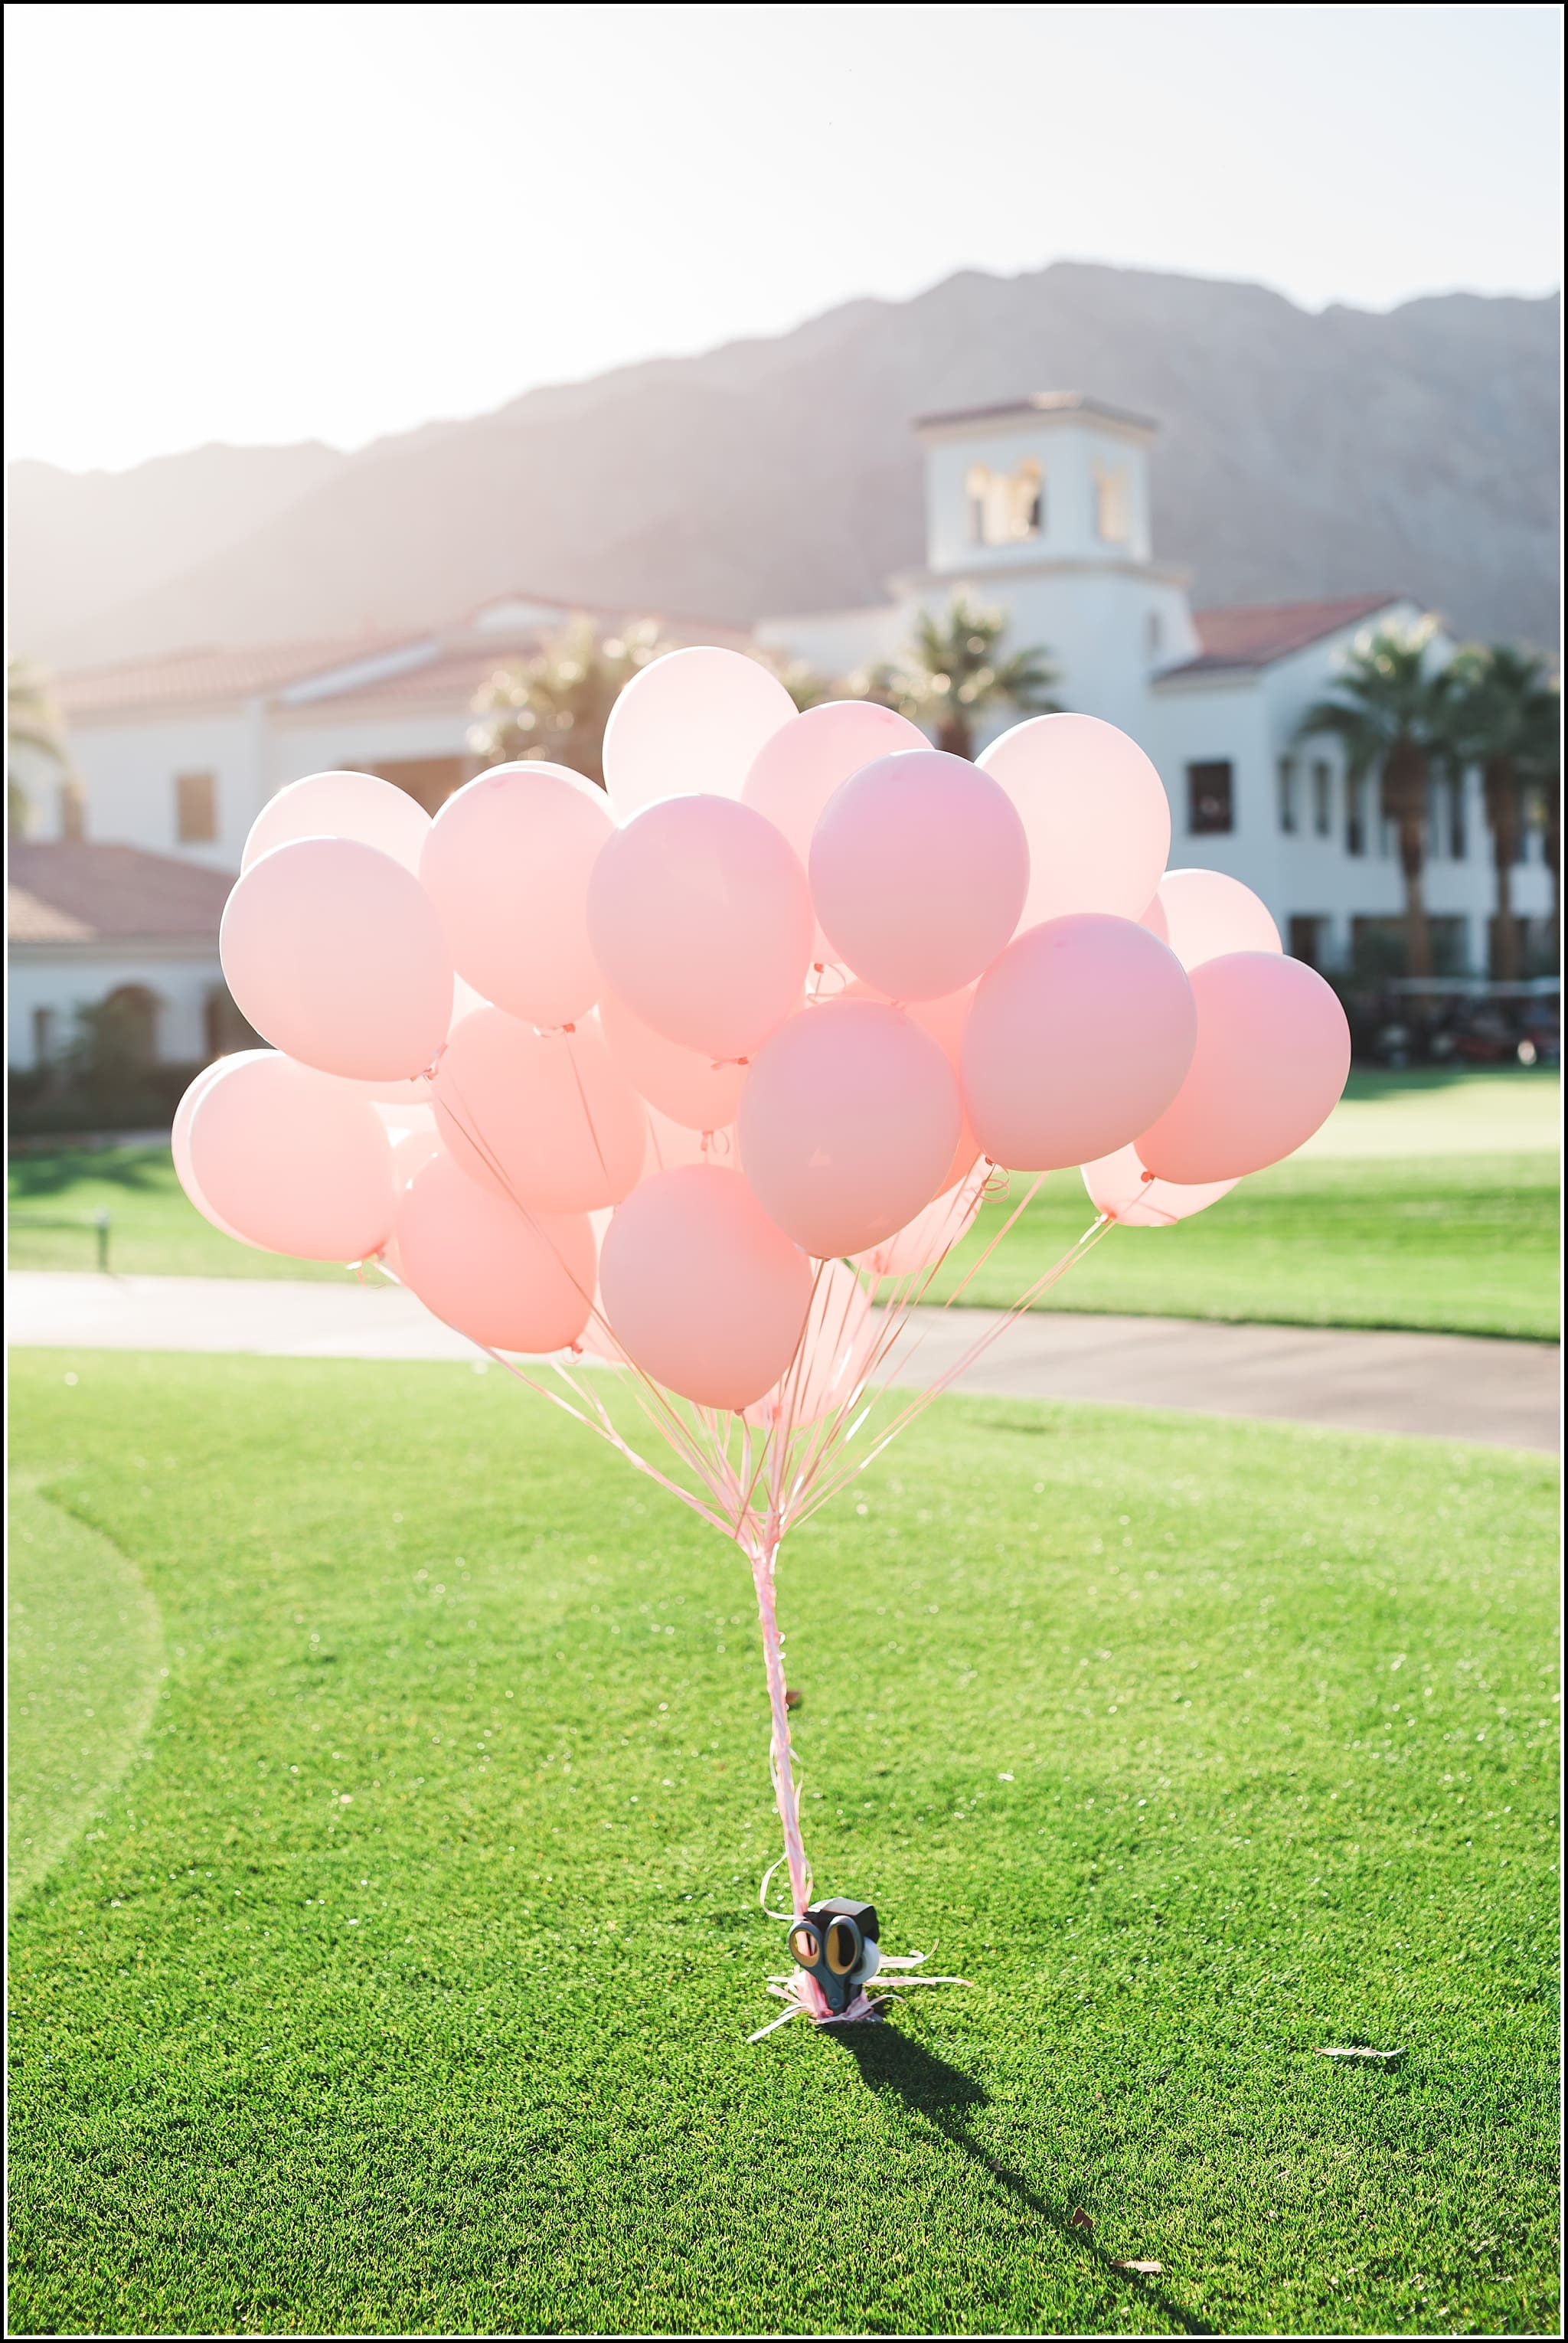  favorite wedding images 2016, wedding photos from 2016, our favorite wedding photos, breast cancer awareness at wedding, memorial ideas for weddings